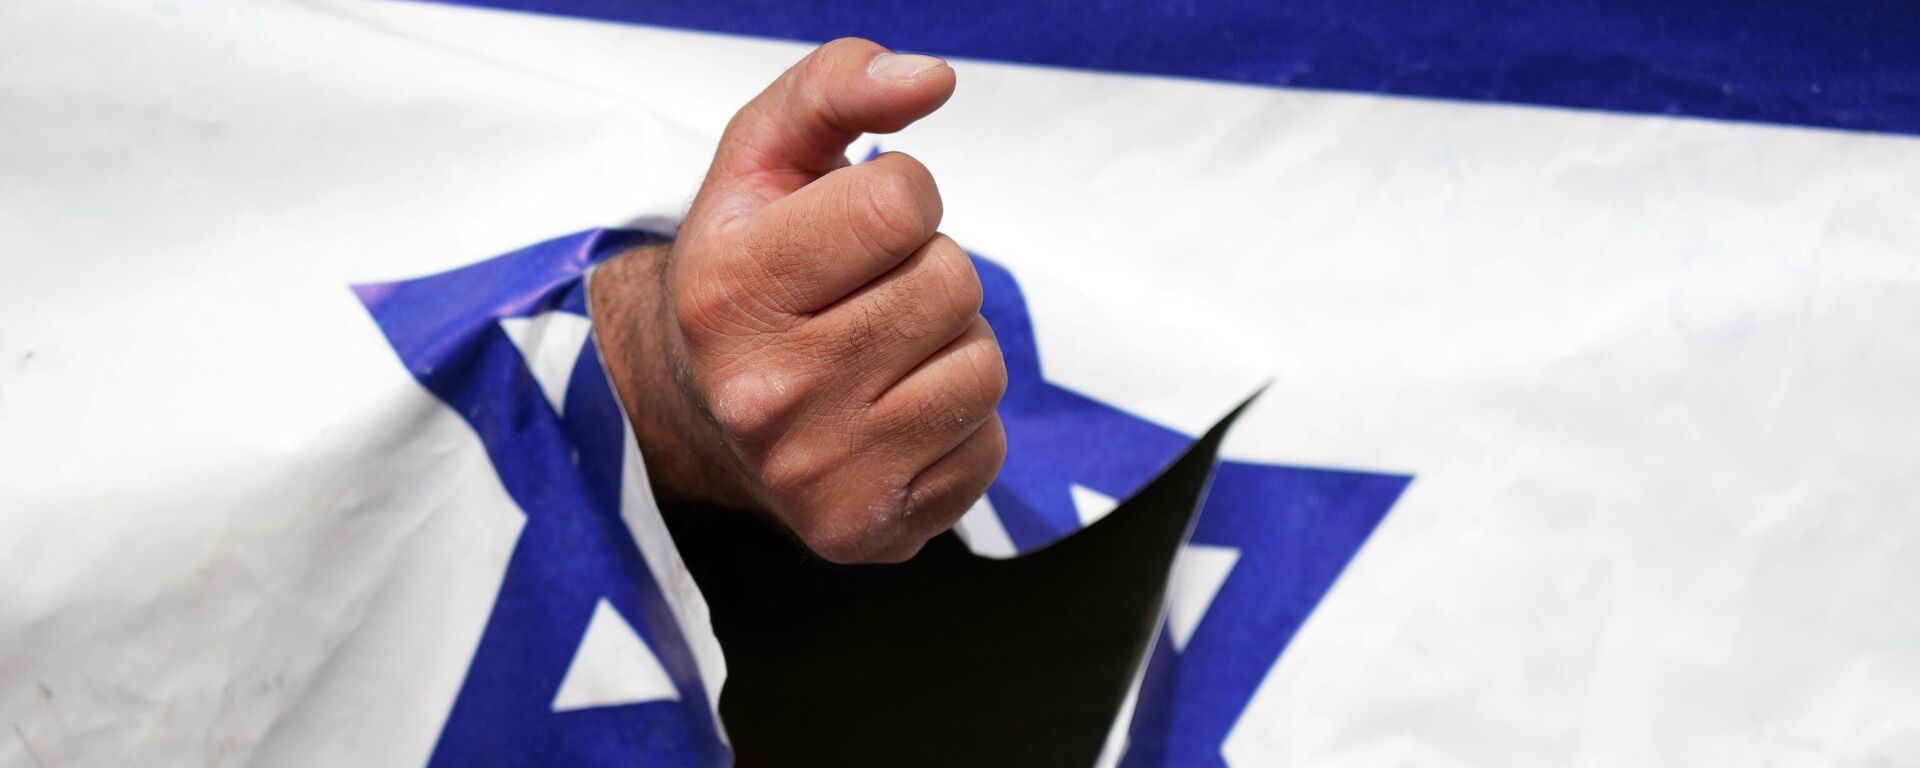 A demonstrator clenches his fist through a torn up representation of the Israeli flag in the annual pro-Palestinian Al-Quds, or Jerusalem, Day rally in Tehran, Iran, Friday, April 29, 2022 - Sputnik International, 1920, 02.02.2023